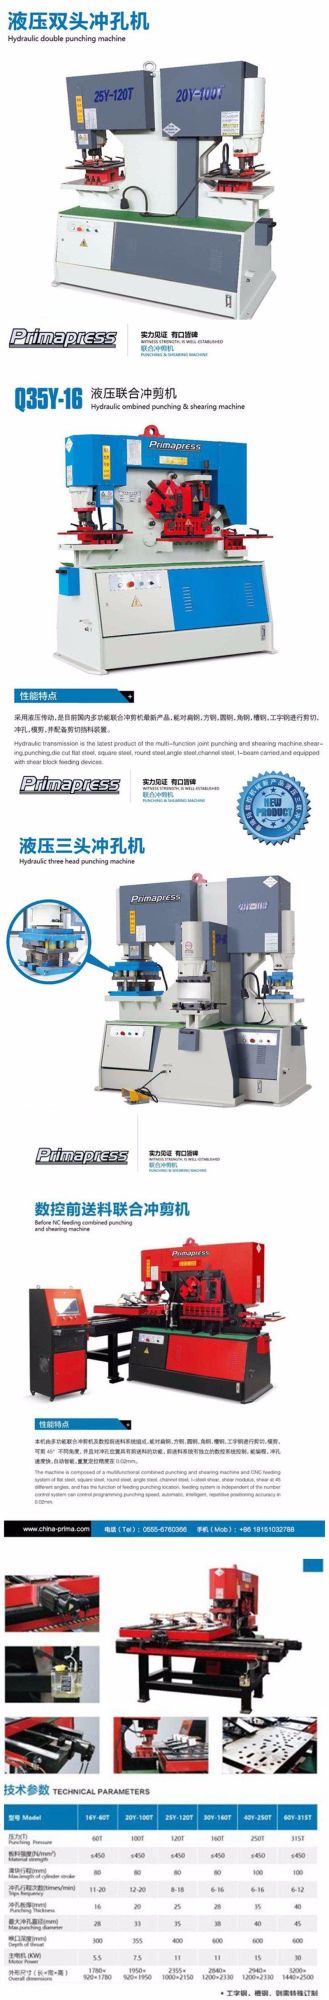 Iron Worker Factory Metal Steel Plate Notching Punch and Shear Machine Hydraulic Ironworker Machine with Multi Function